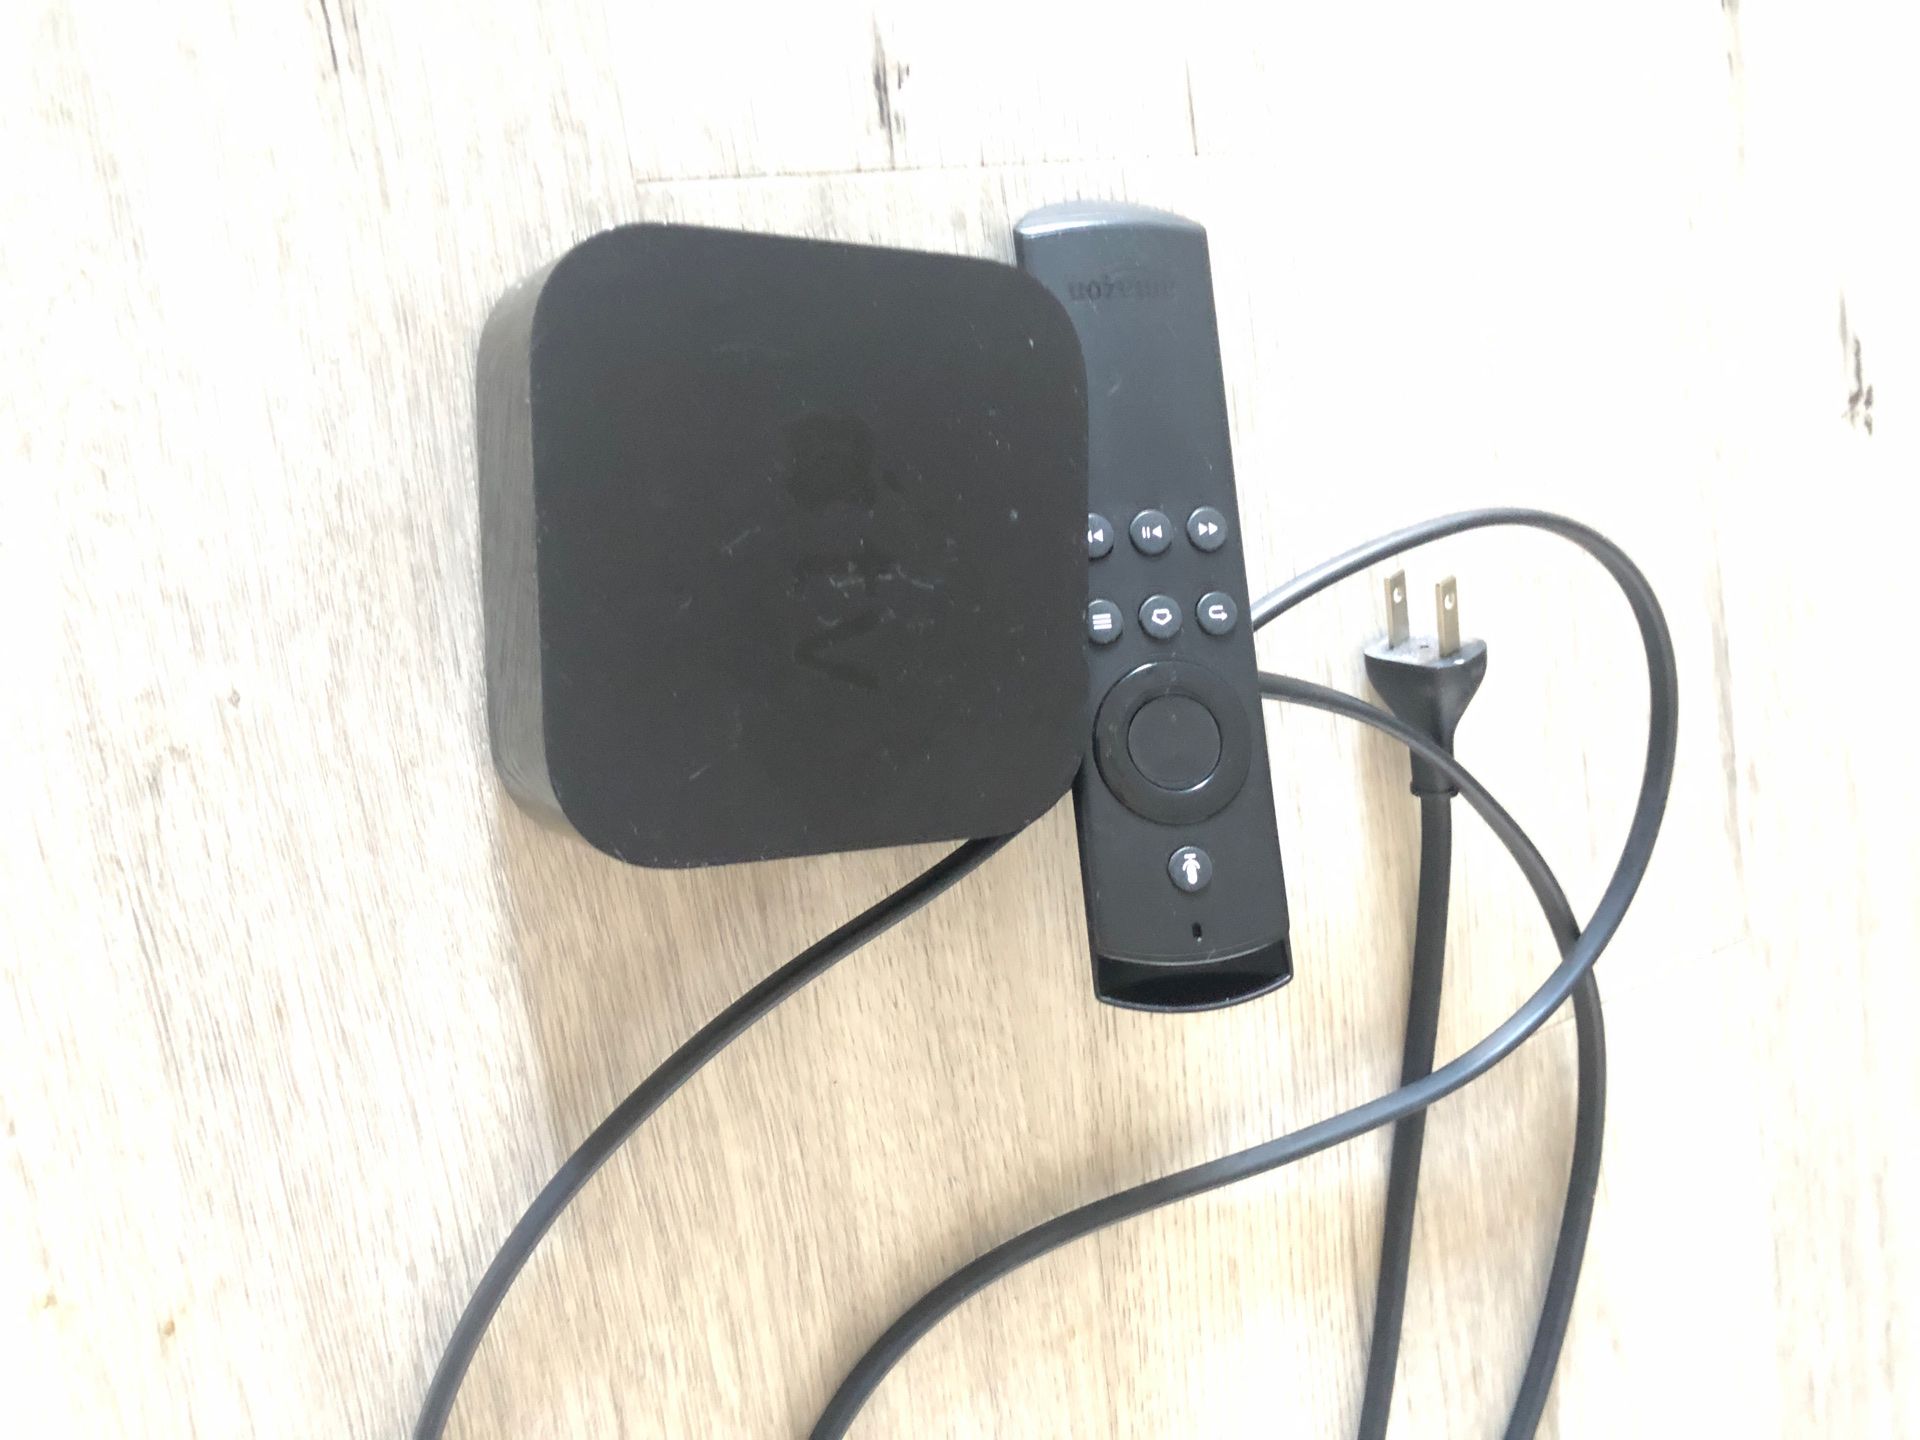 Apple TV device with remote